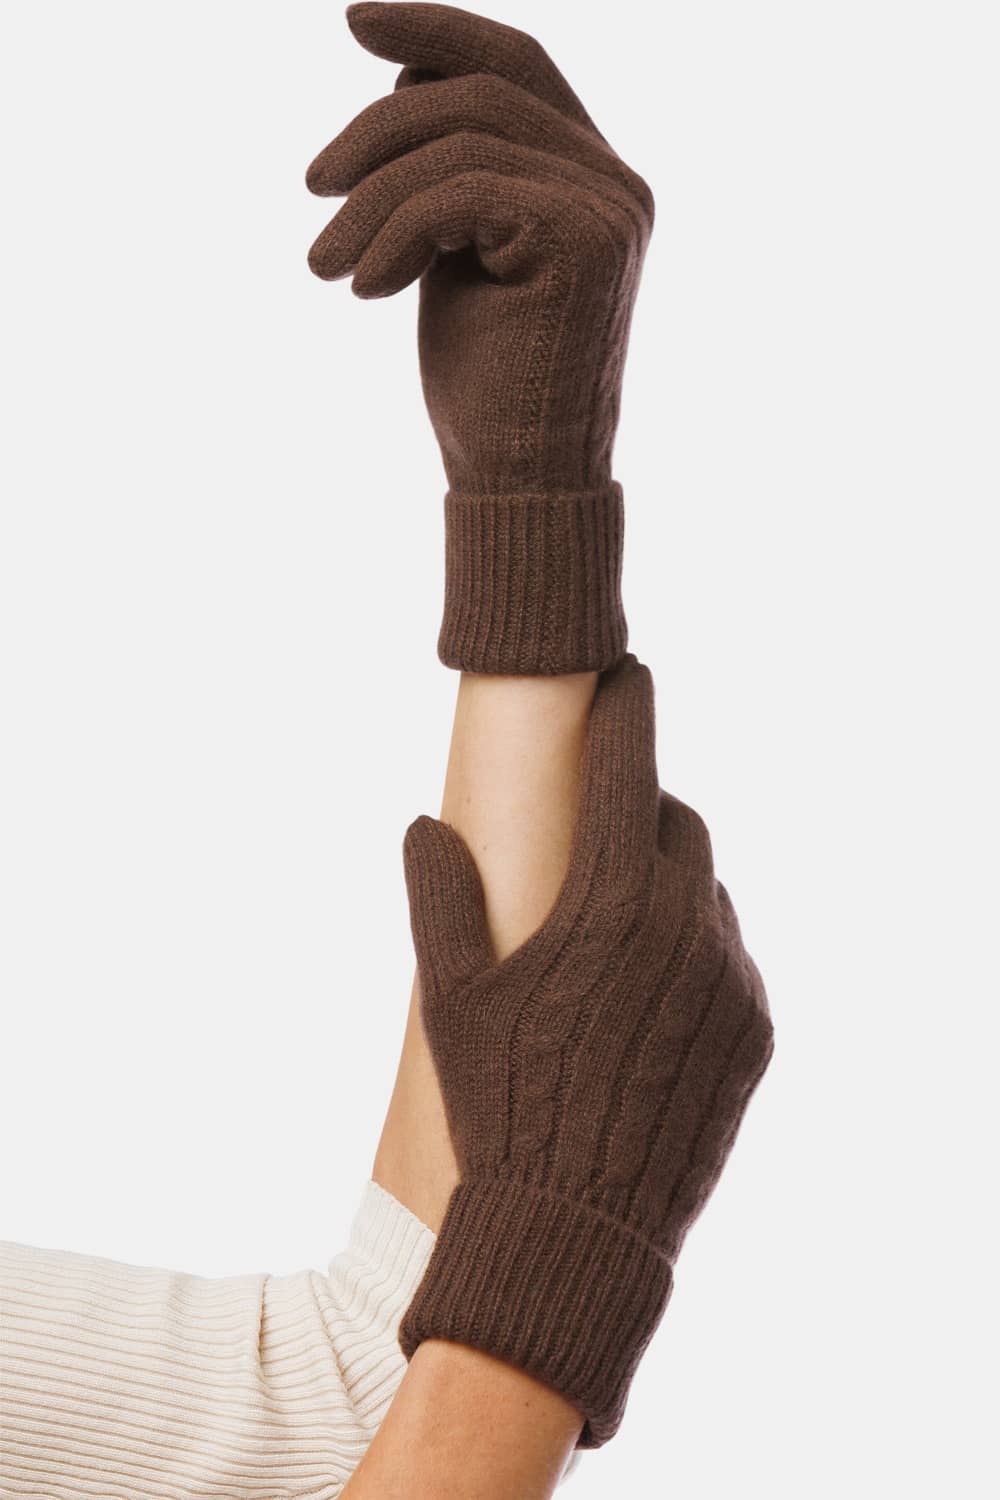 Woman's hands wearing Fishers Finery 100% cashmere cable knit brown gloves with rolled cuff